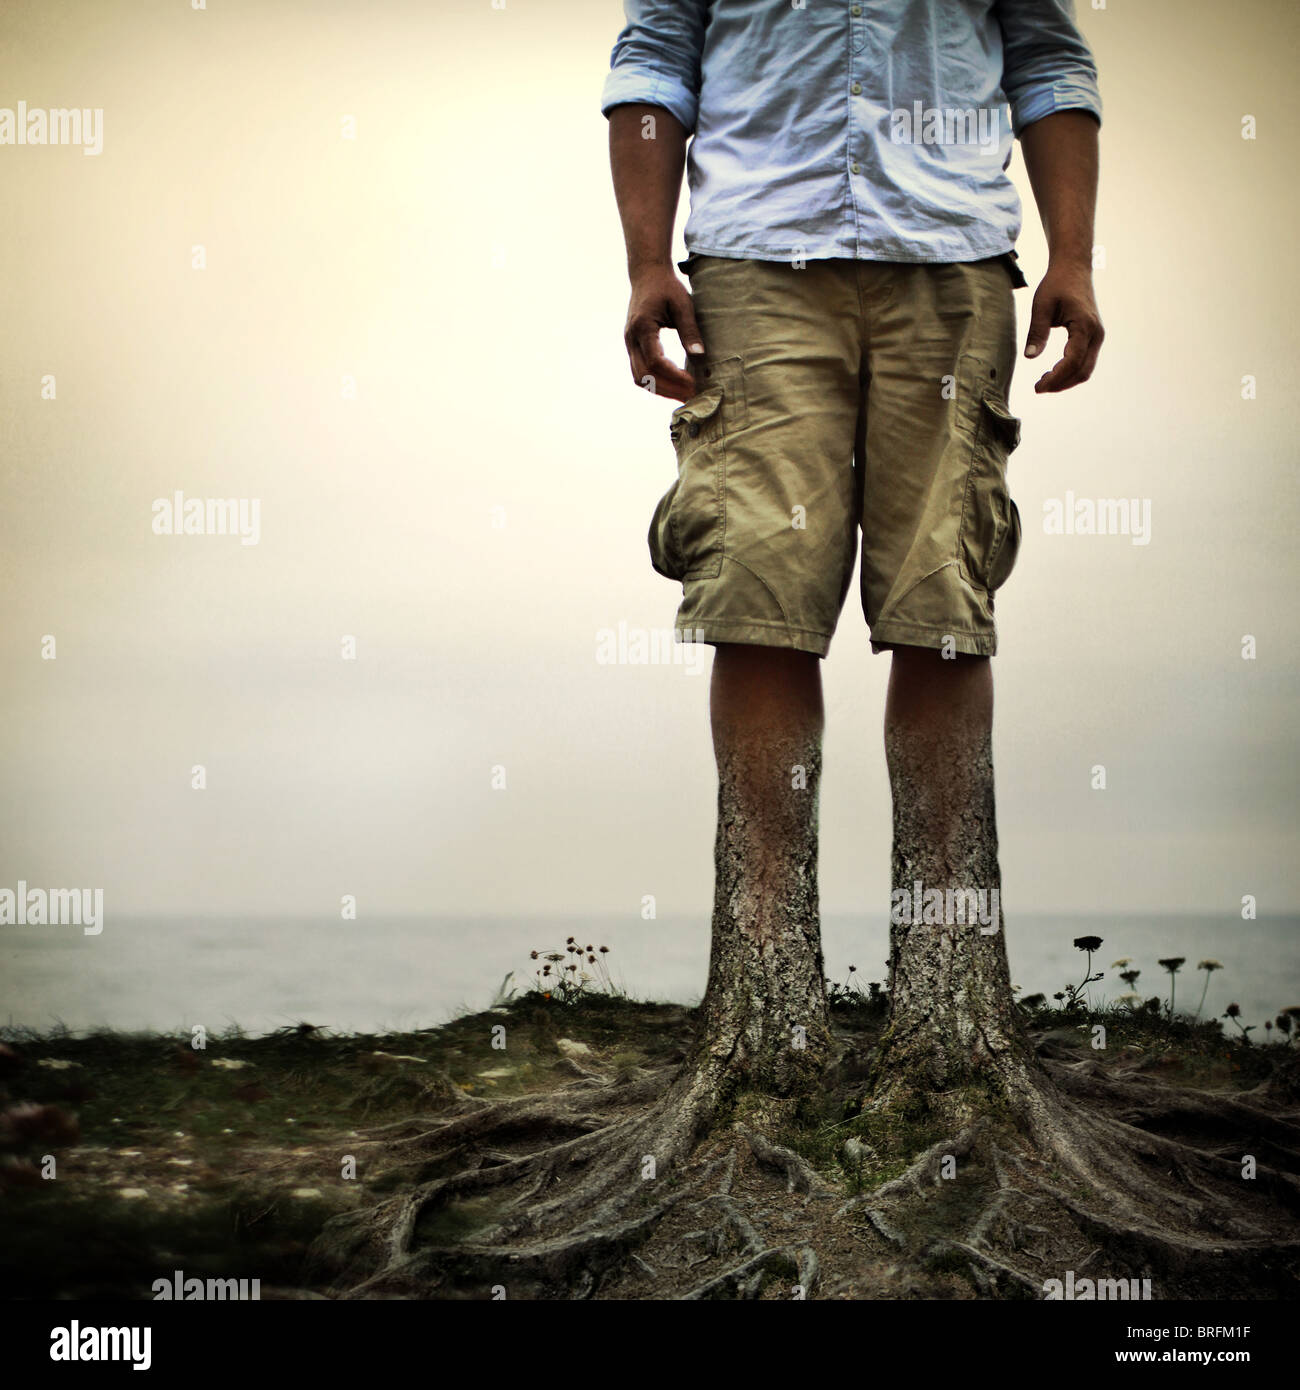 man with tree trunks for legs Stock Photo - Alamy